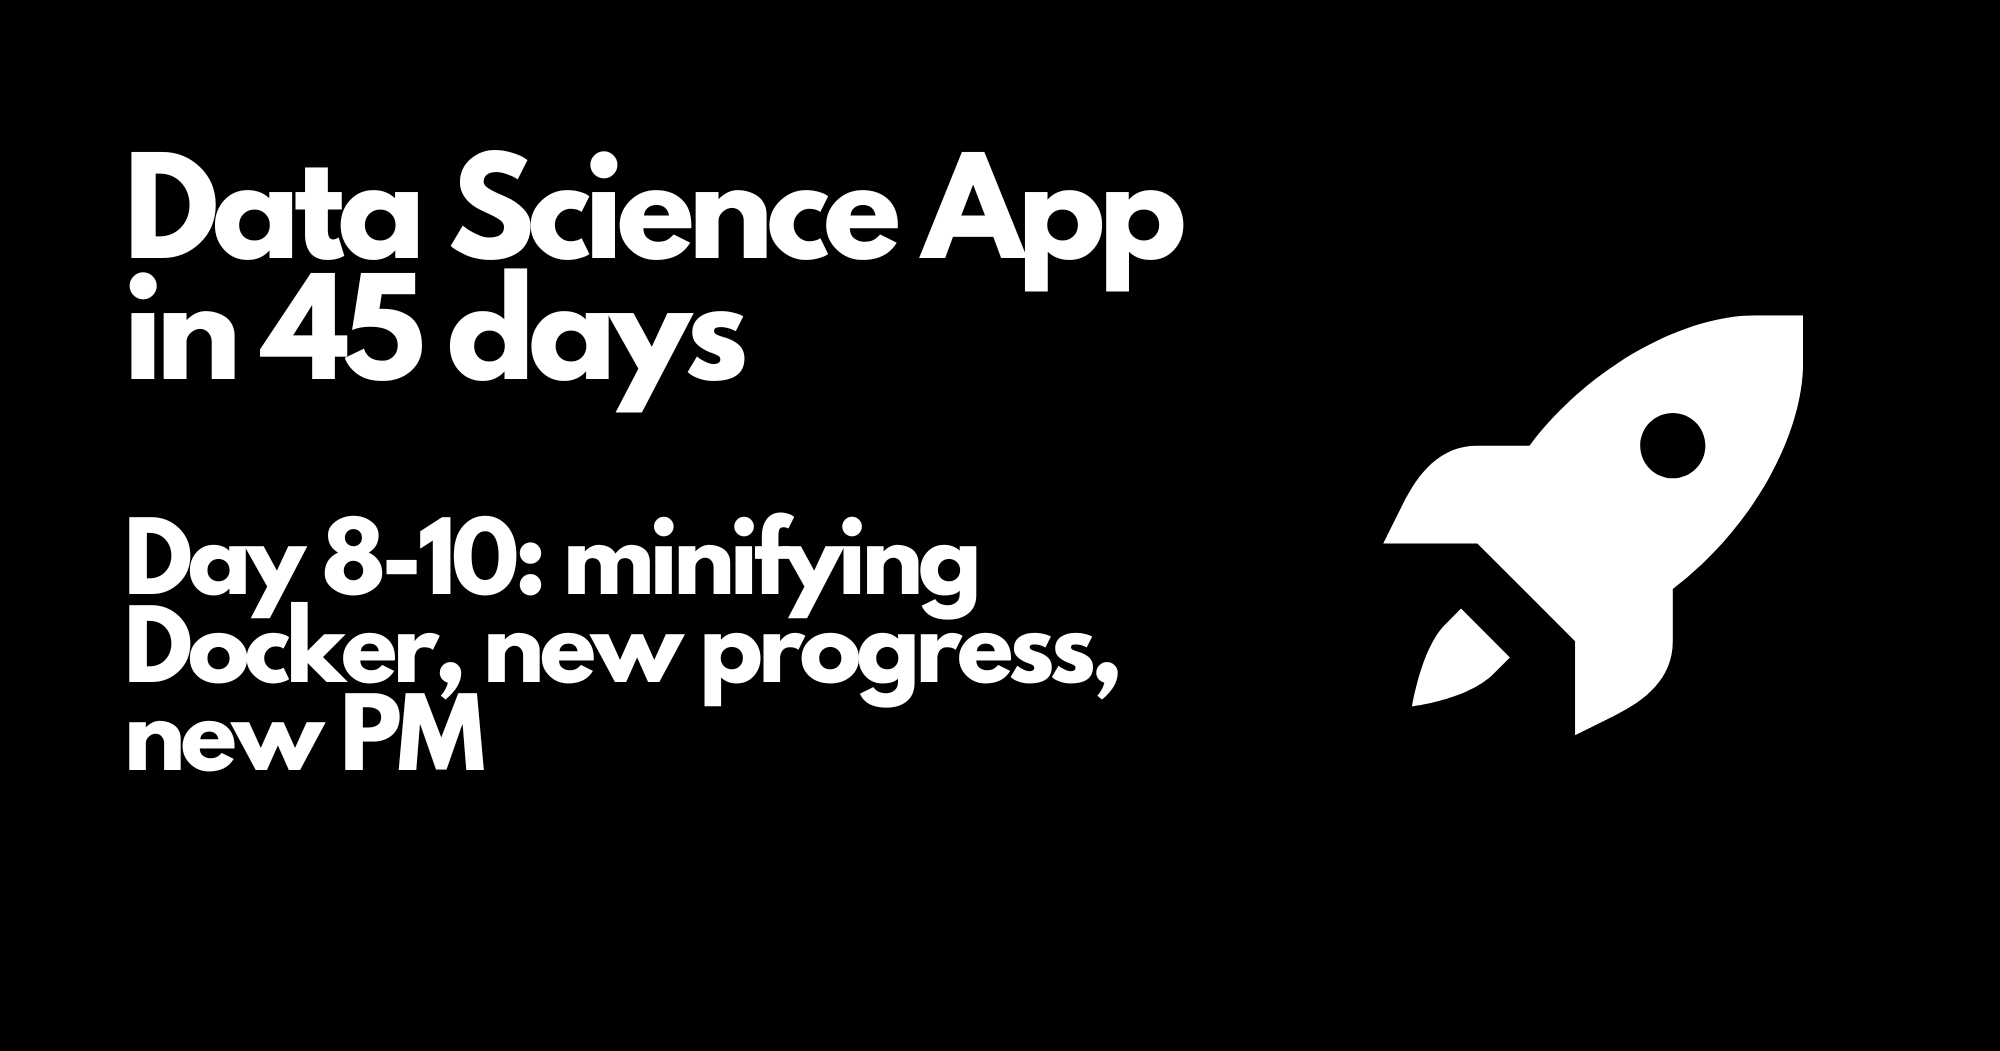 Day 8-10 - Data Science App in 45 days - minifying Docker, new progress, and new PM